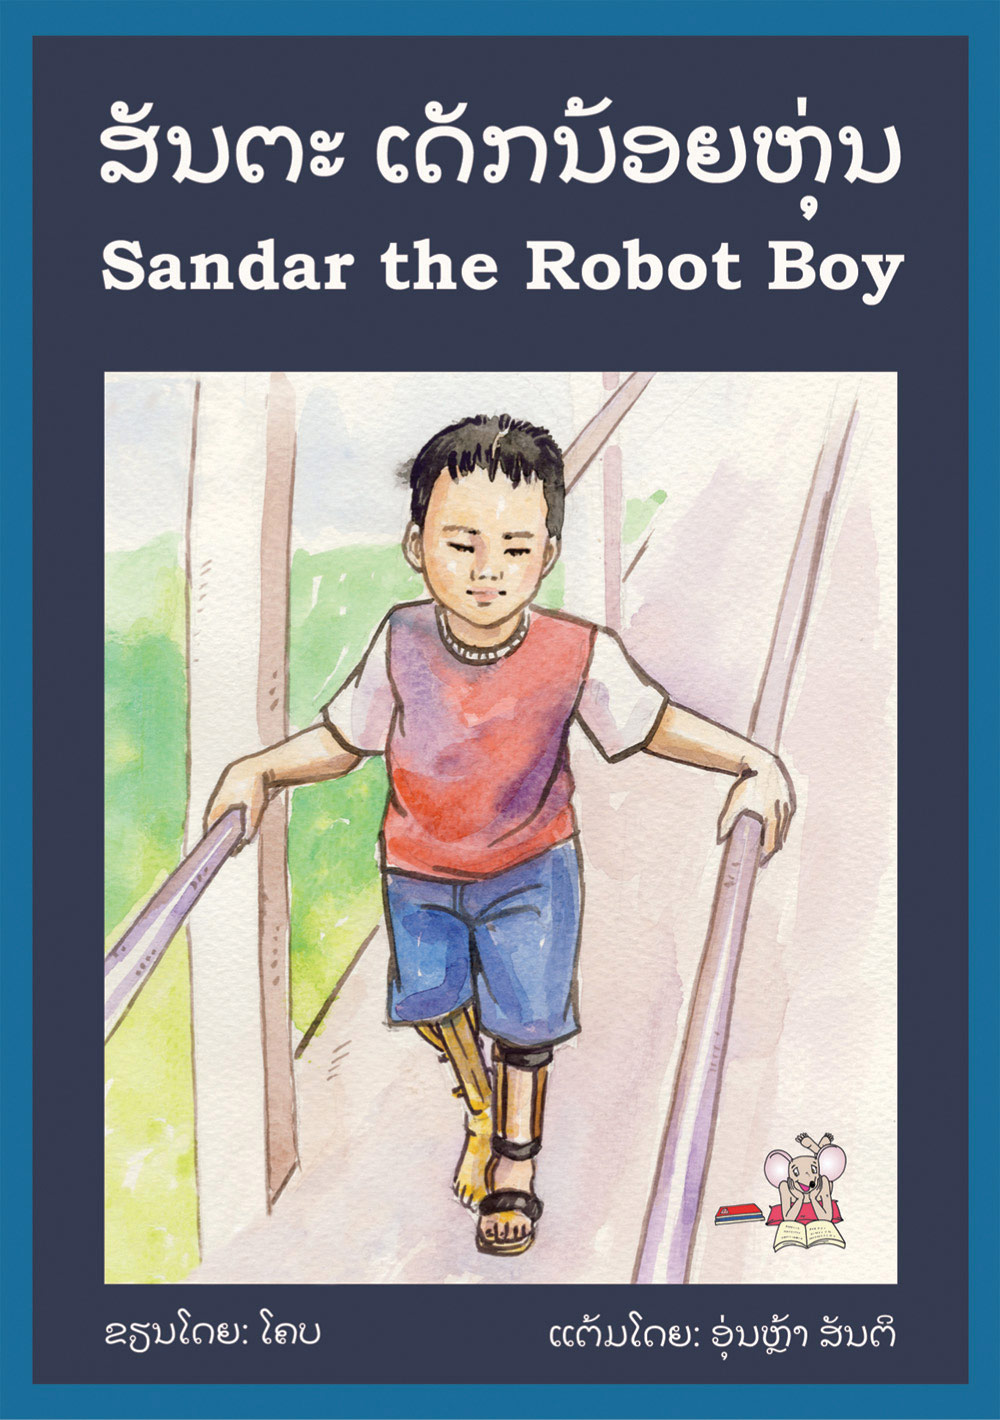 Sandar: The Robot Boy large book cover, published in Lao language